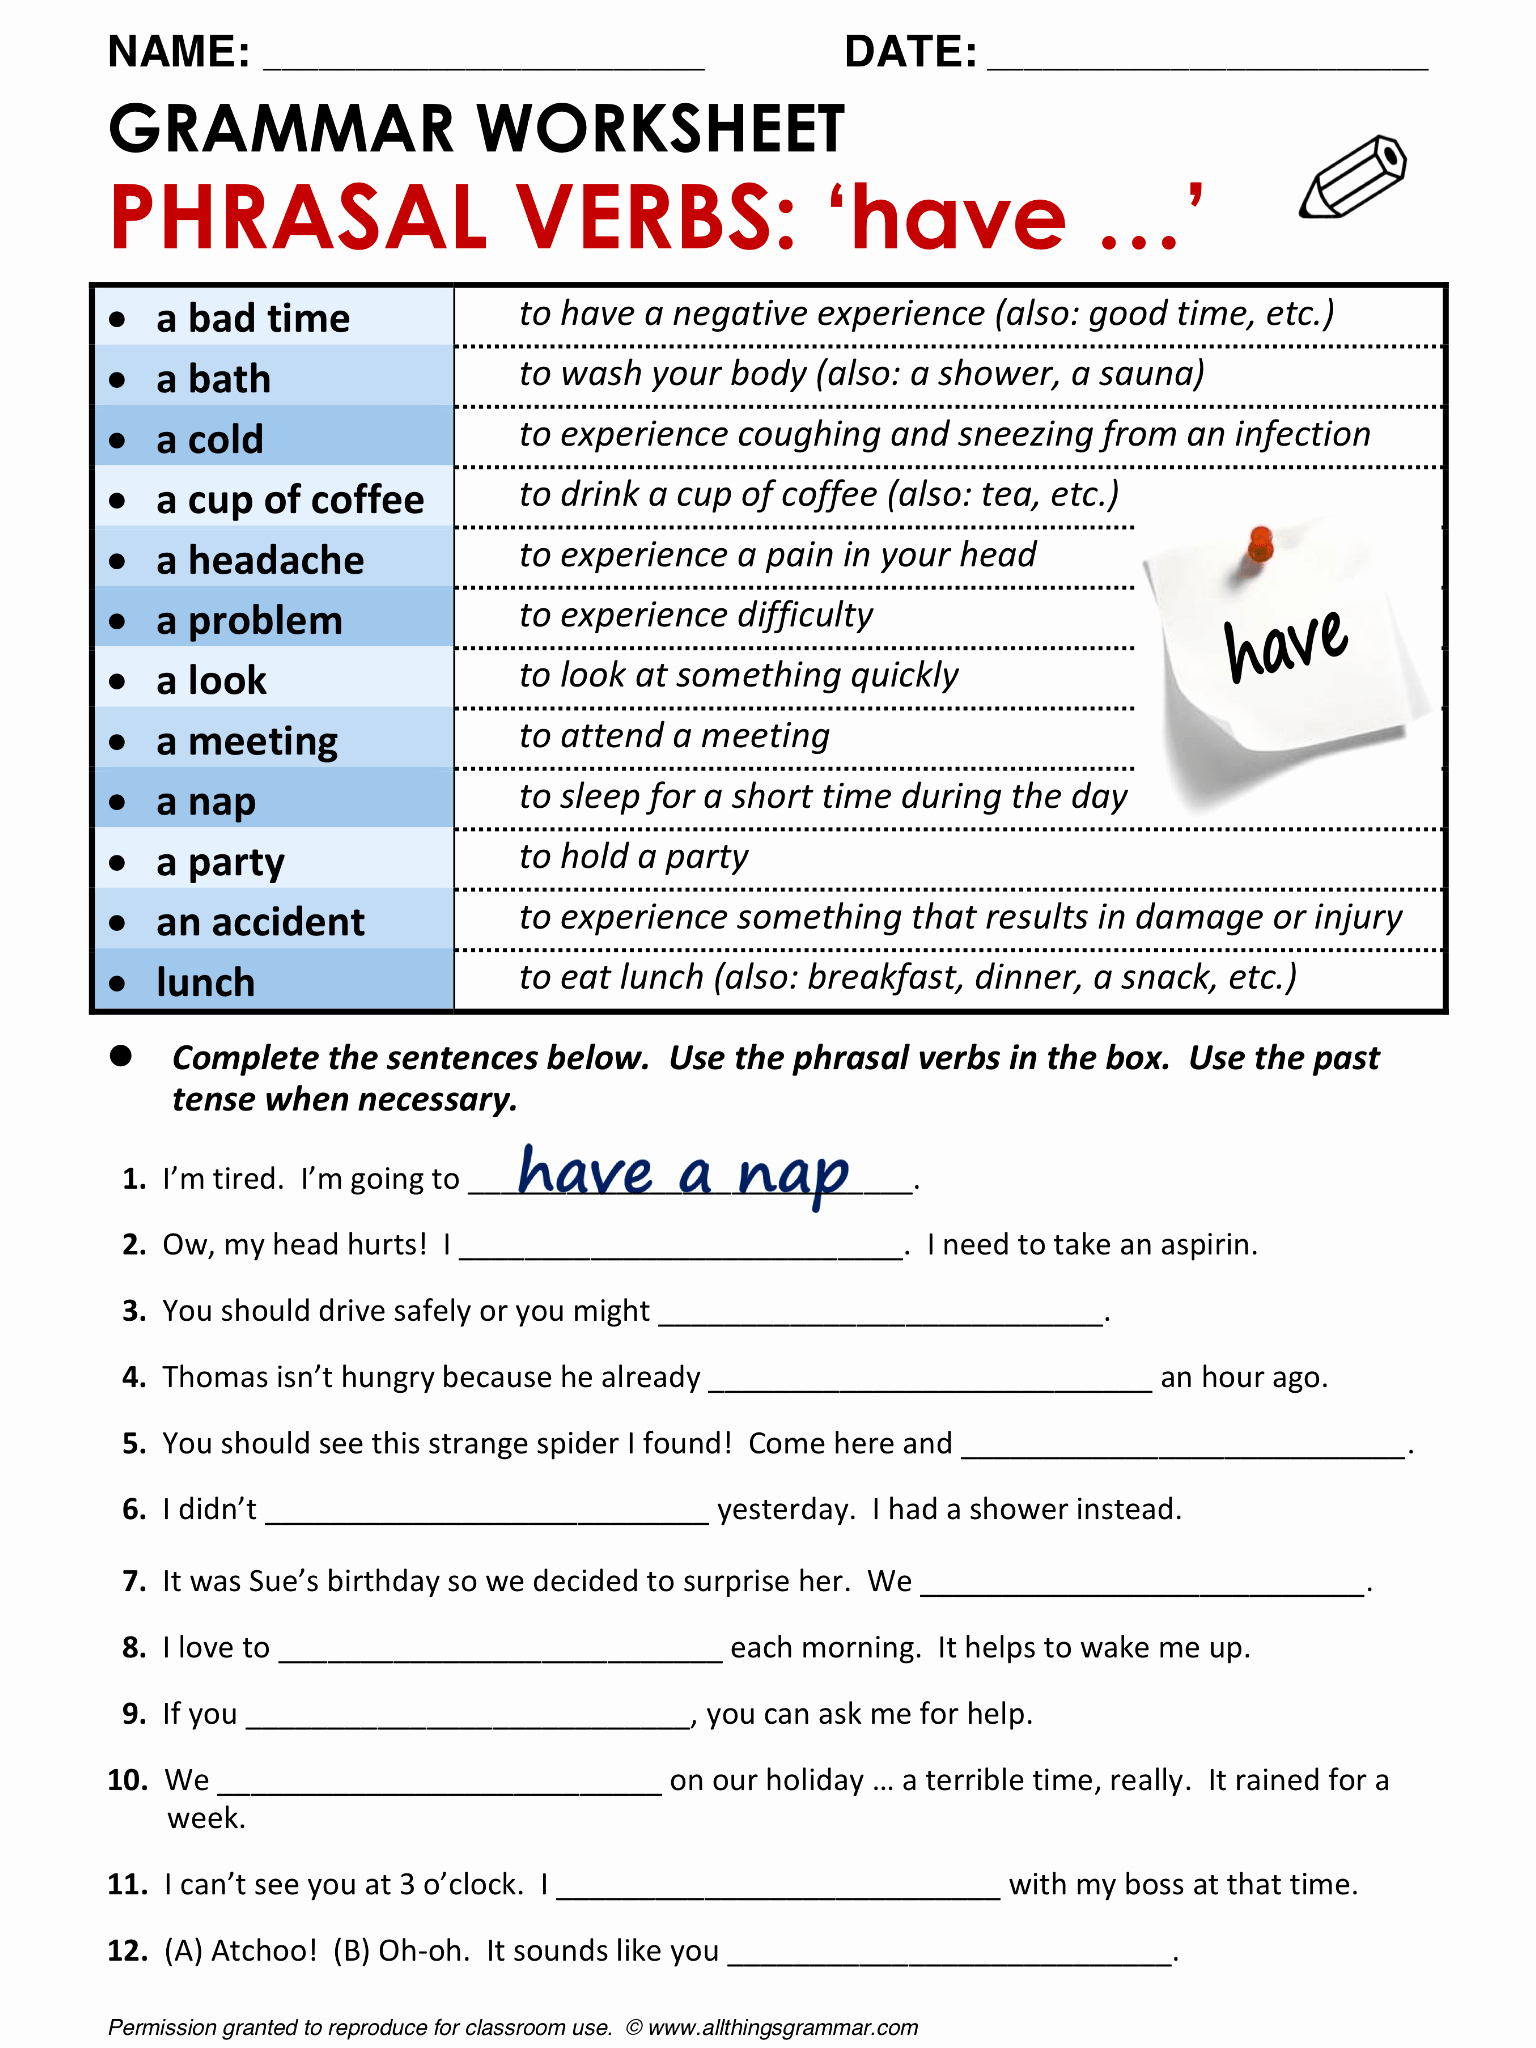 Verbs Worksheets for Middle School Beautiful Grammar Worksheets for Middle School Students